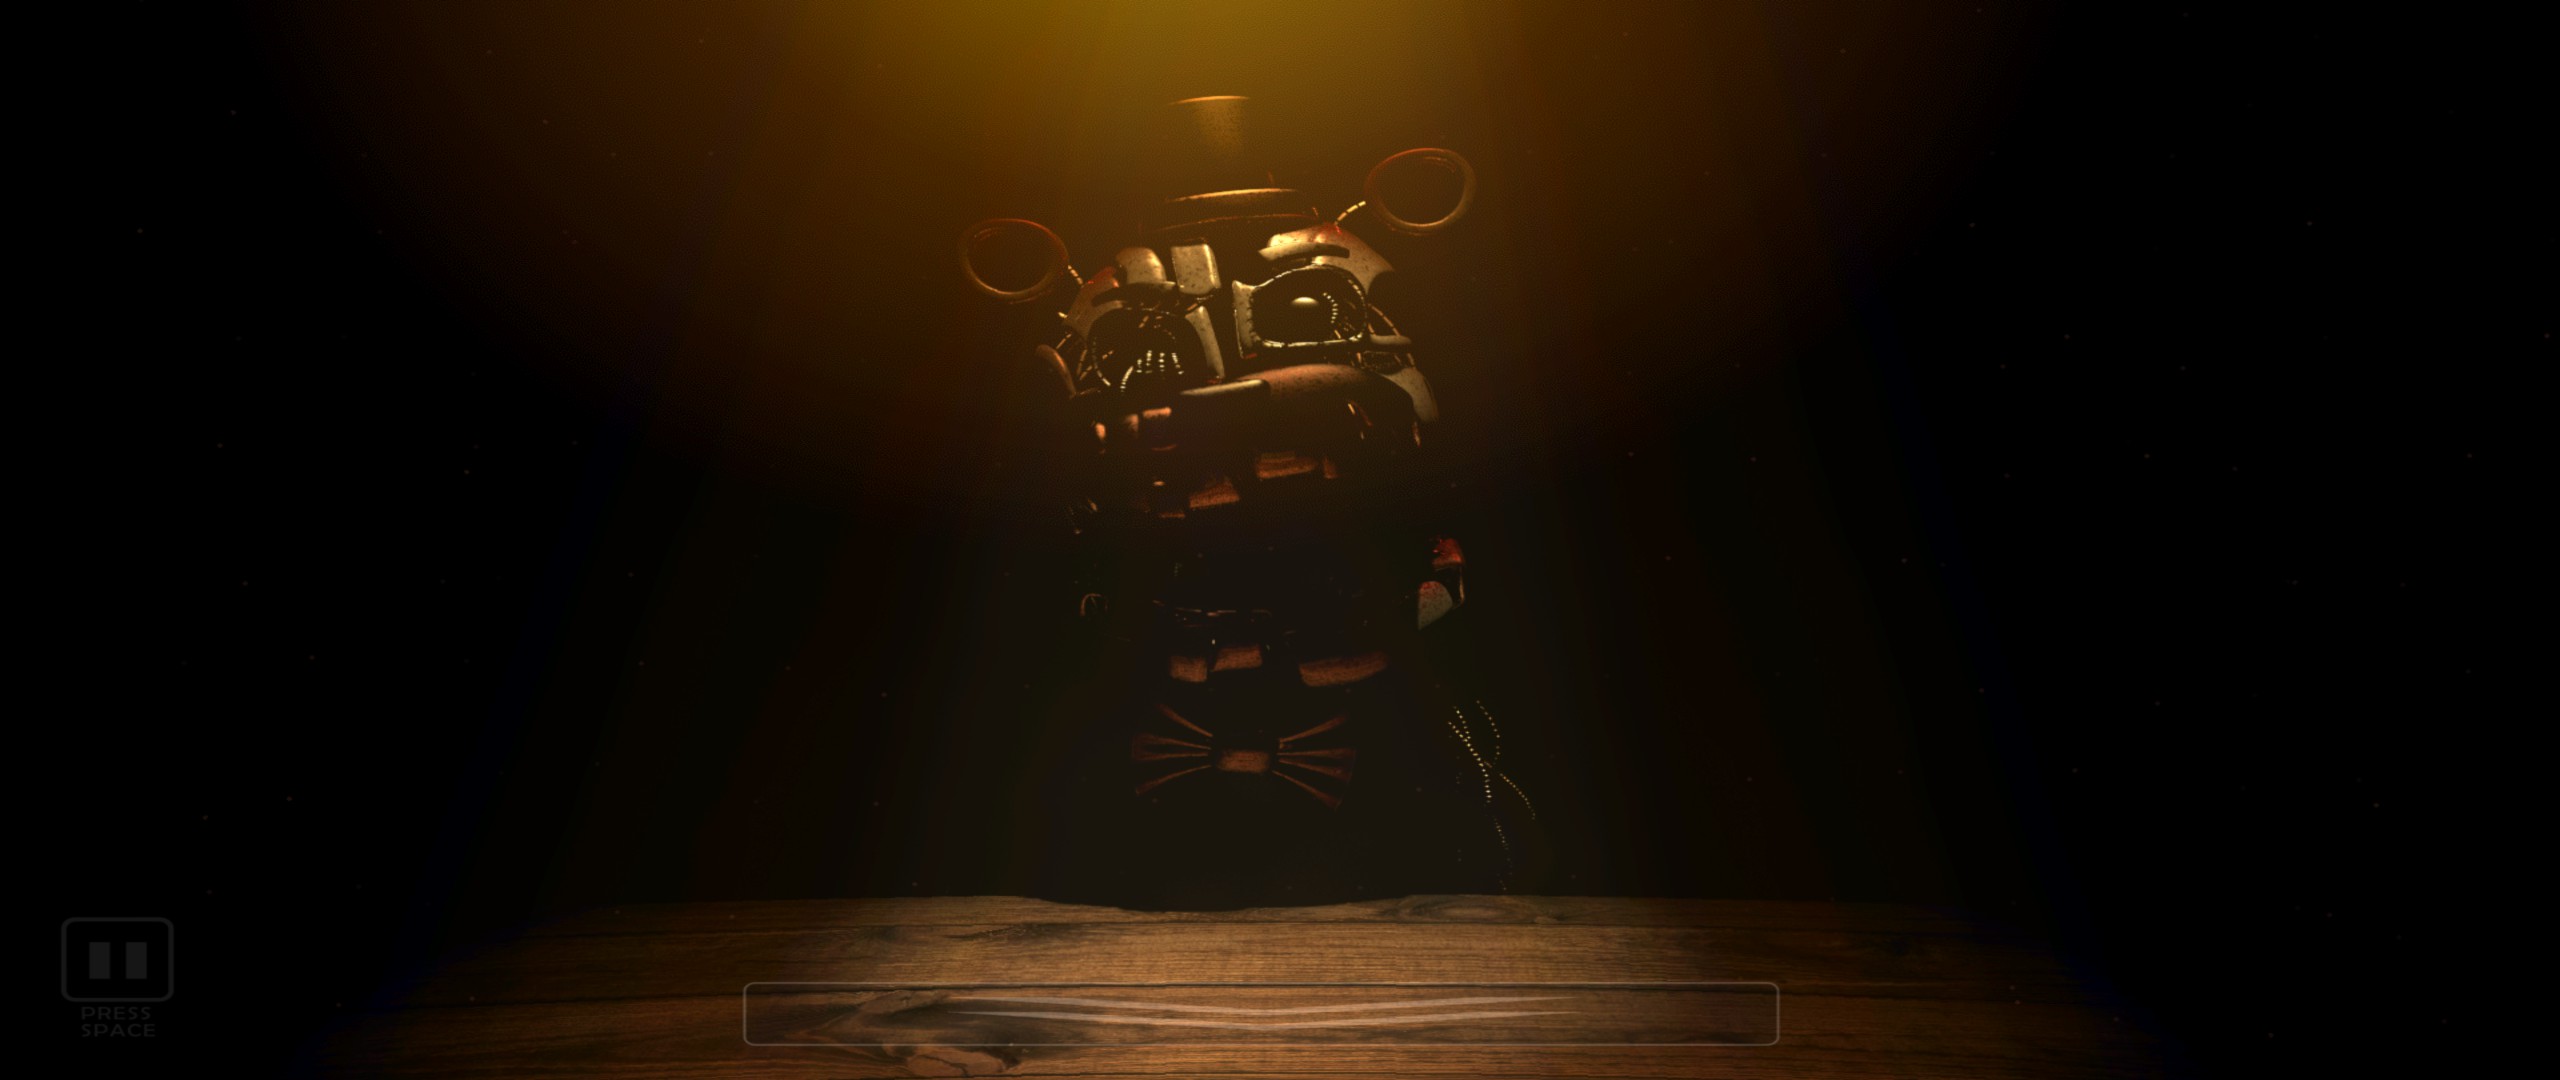 The New Five Nights At Freddy's Game Is Not What It Seems